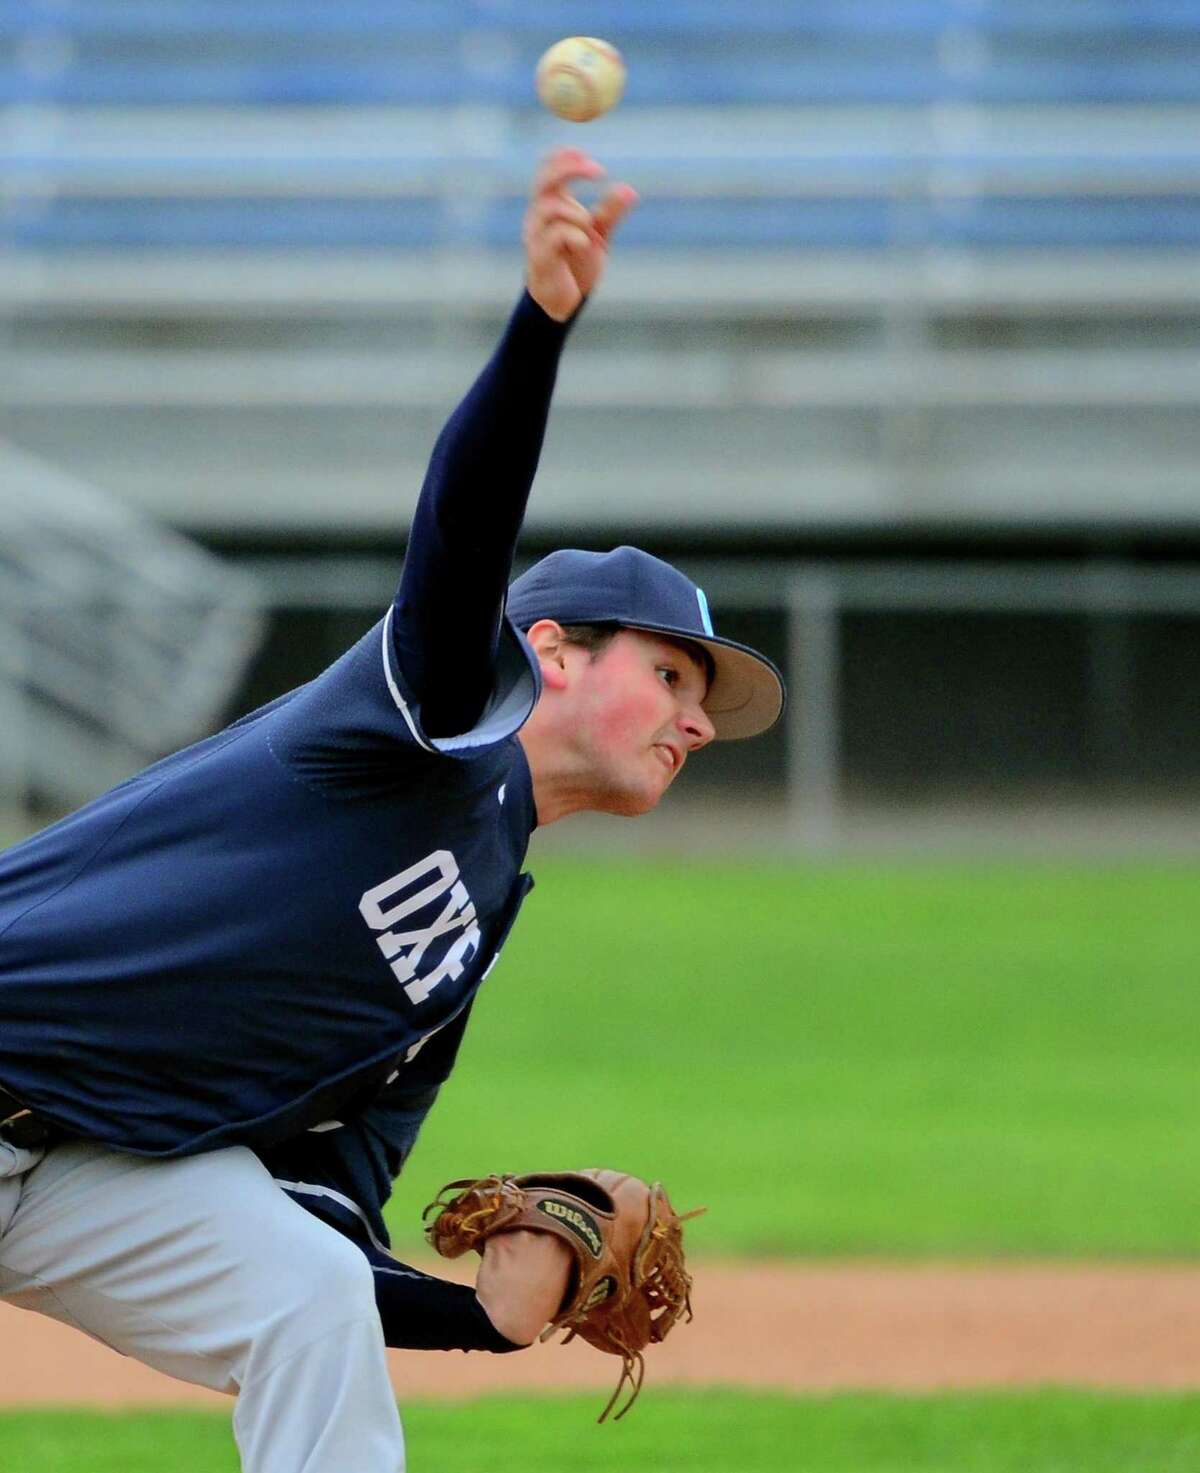 Oxford’s Liam Donaldson delivers a pitch during his team’s 9-0 win over Ansonia on Thursday.